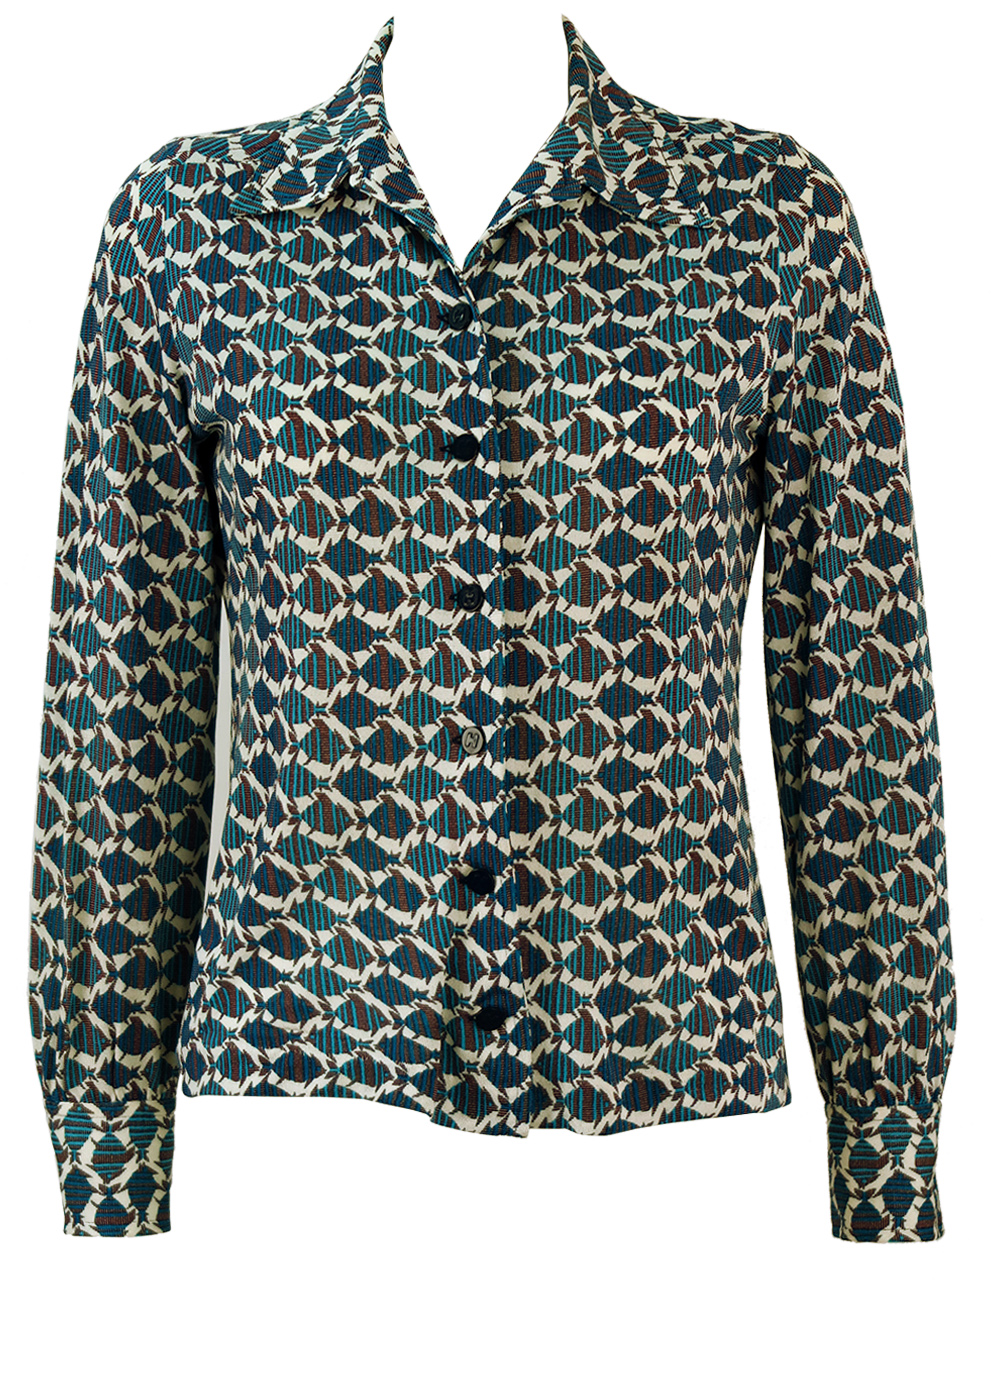 Rare Vintage 60's Hermes Blouse with Brown & Blue Fish Pattern - M ...